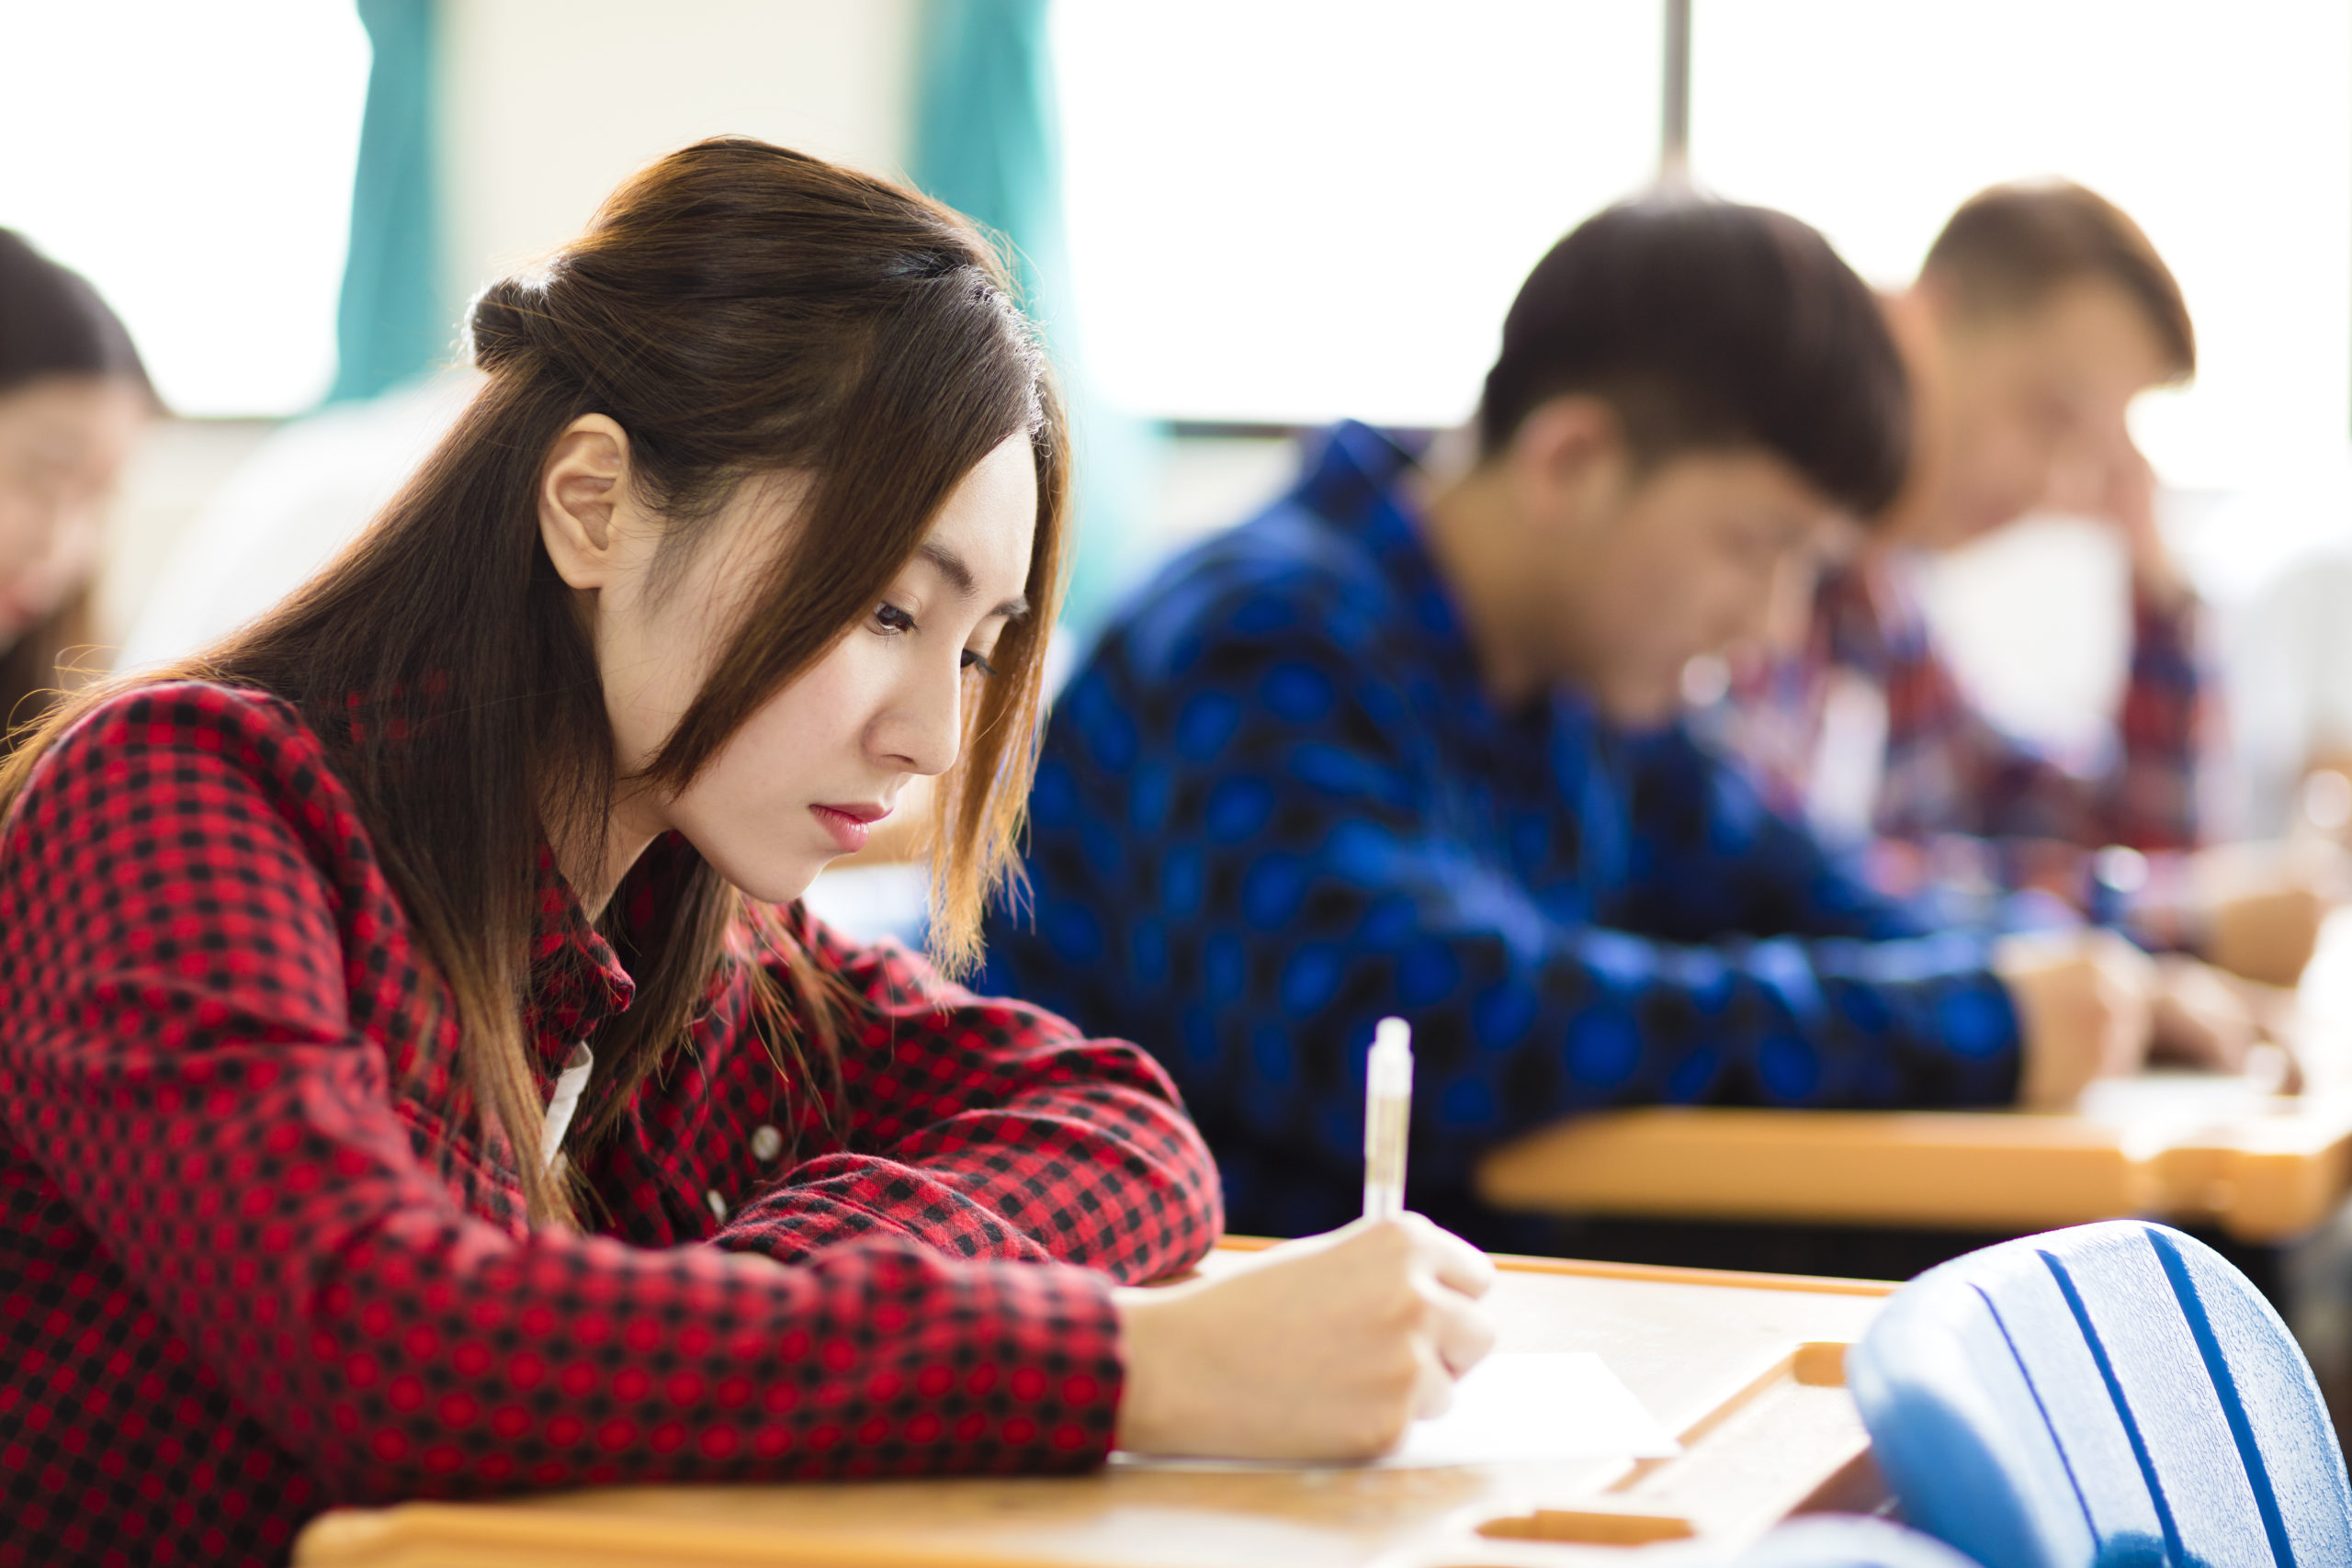 female college student sitting and exam in the classroom